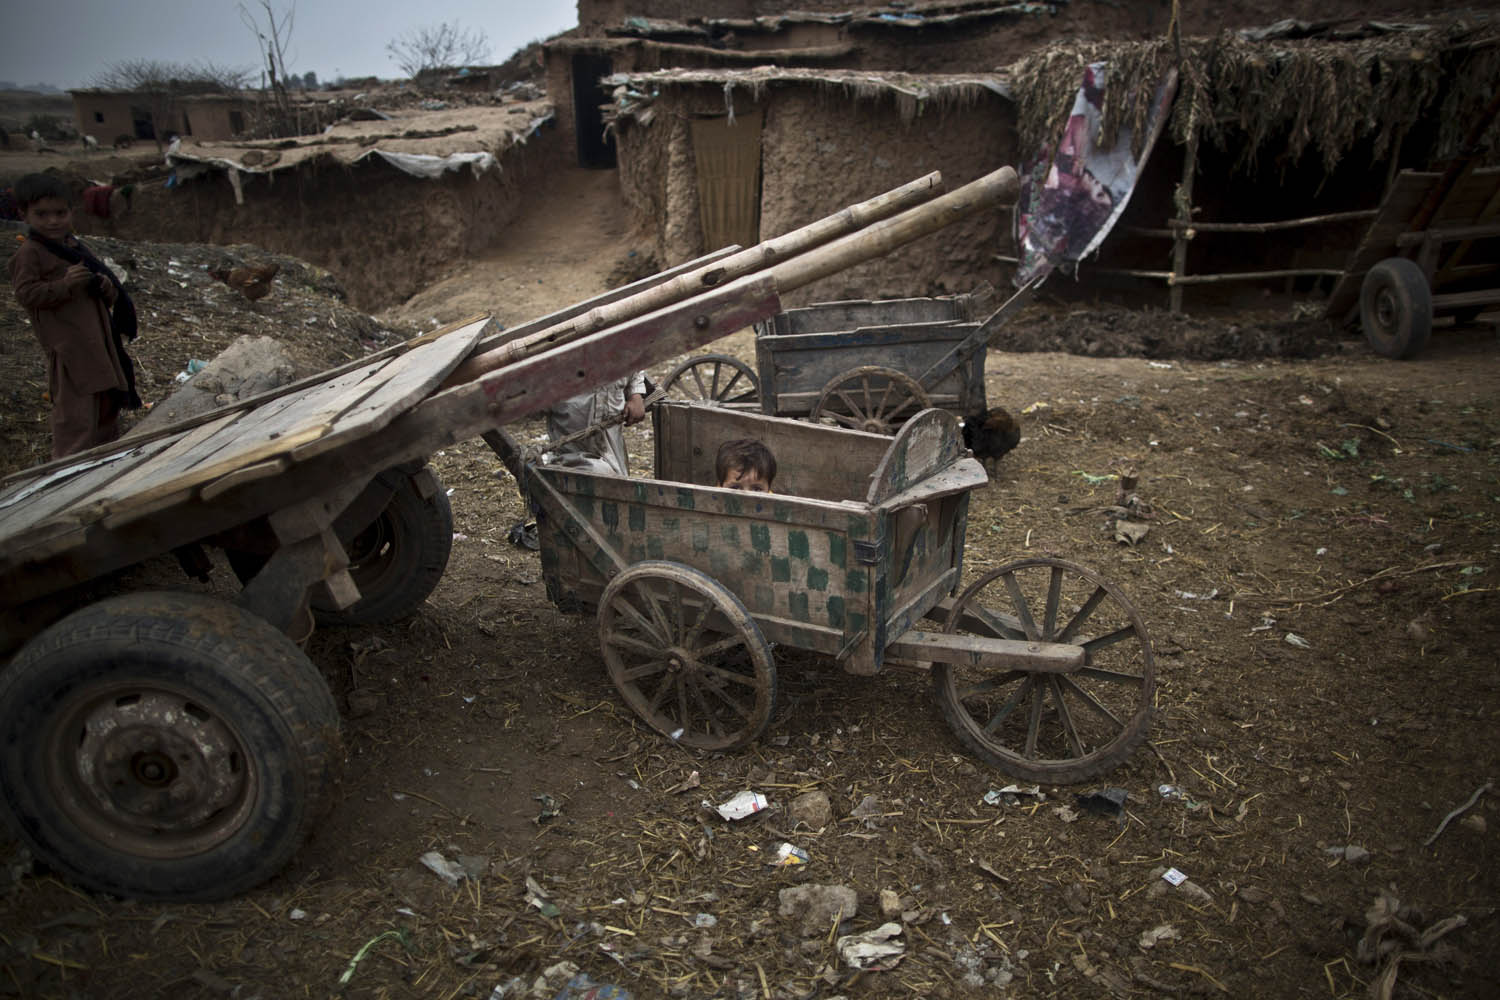 Feb. 2, 2014. An Afghan refugee child hides in a wooden-cart placed near his home in a poor neighborhood on the outskirts of Islamabad.